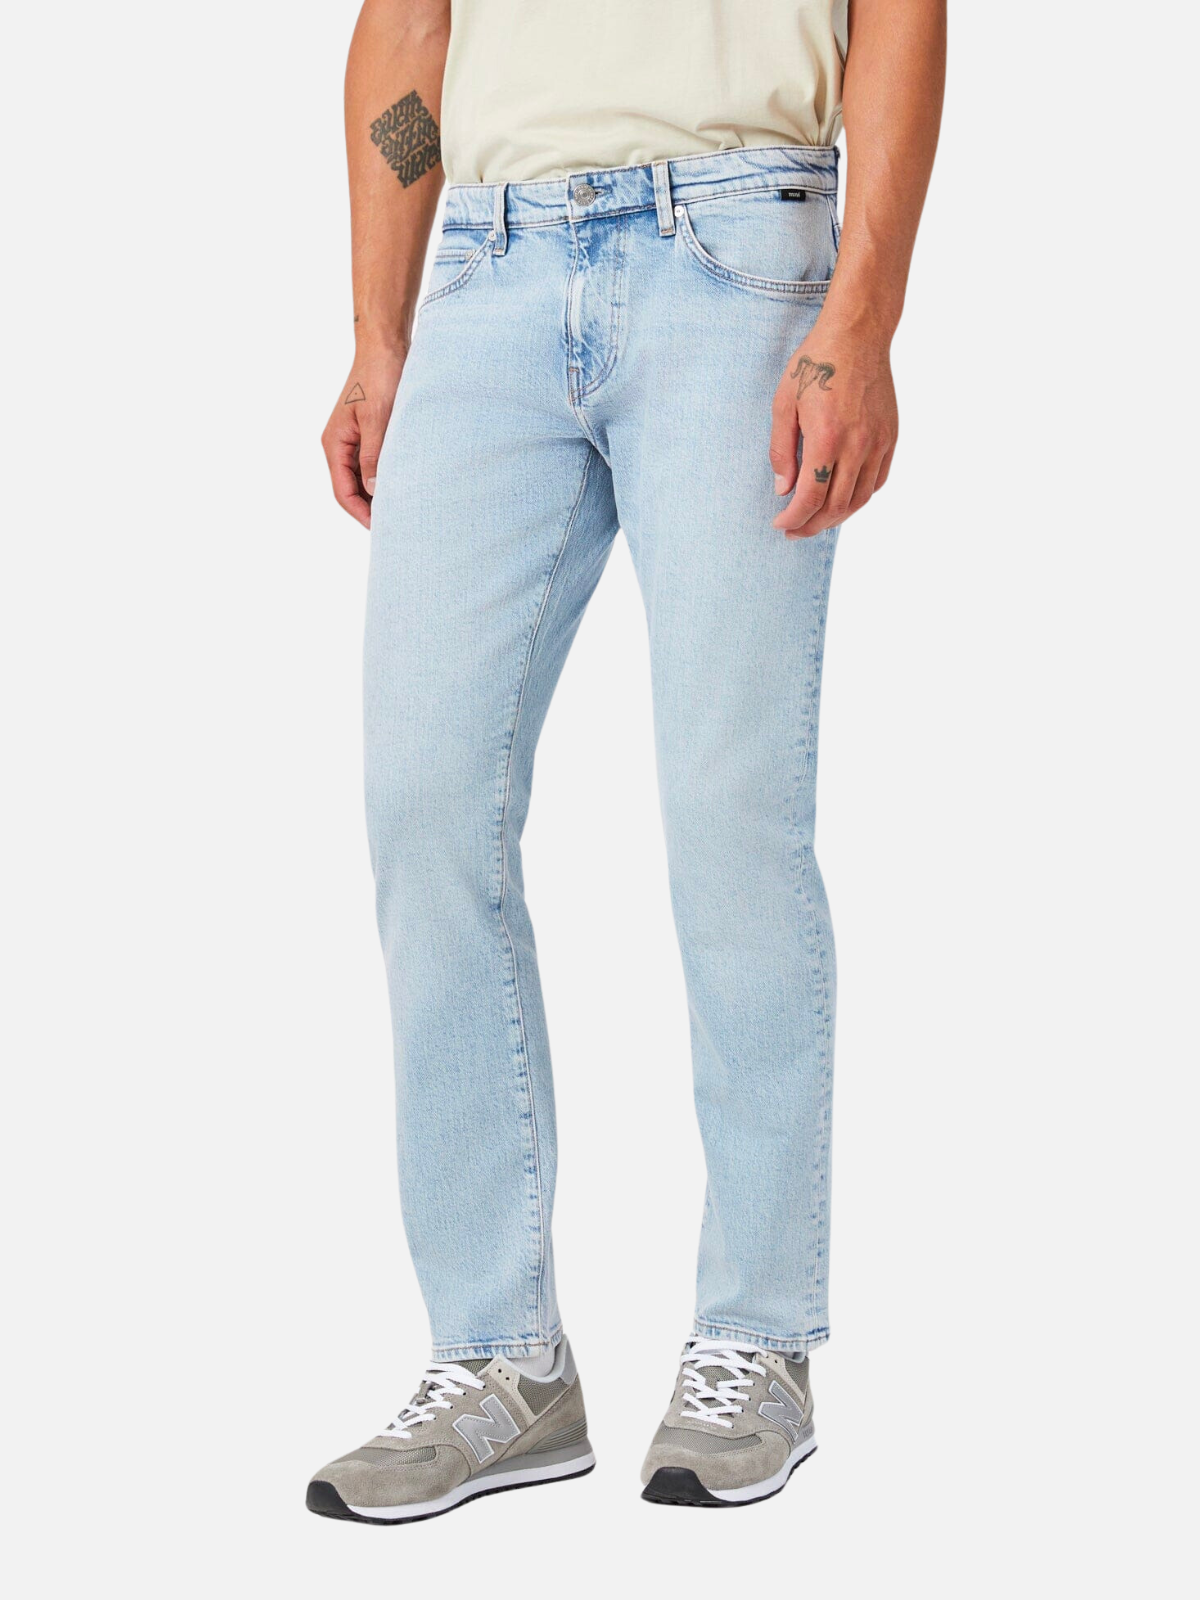 Mavi Marcus Slim Straight Jeans Bleached Recycled Blue Vintage Mens Jeans Kempt Athens Georgia Clothing Shop for Guys